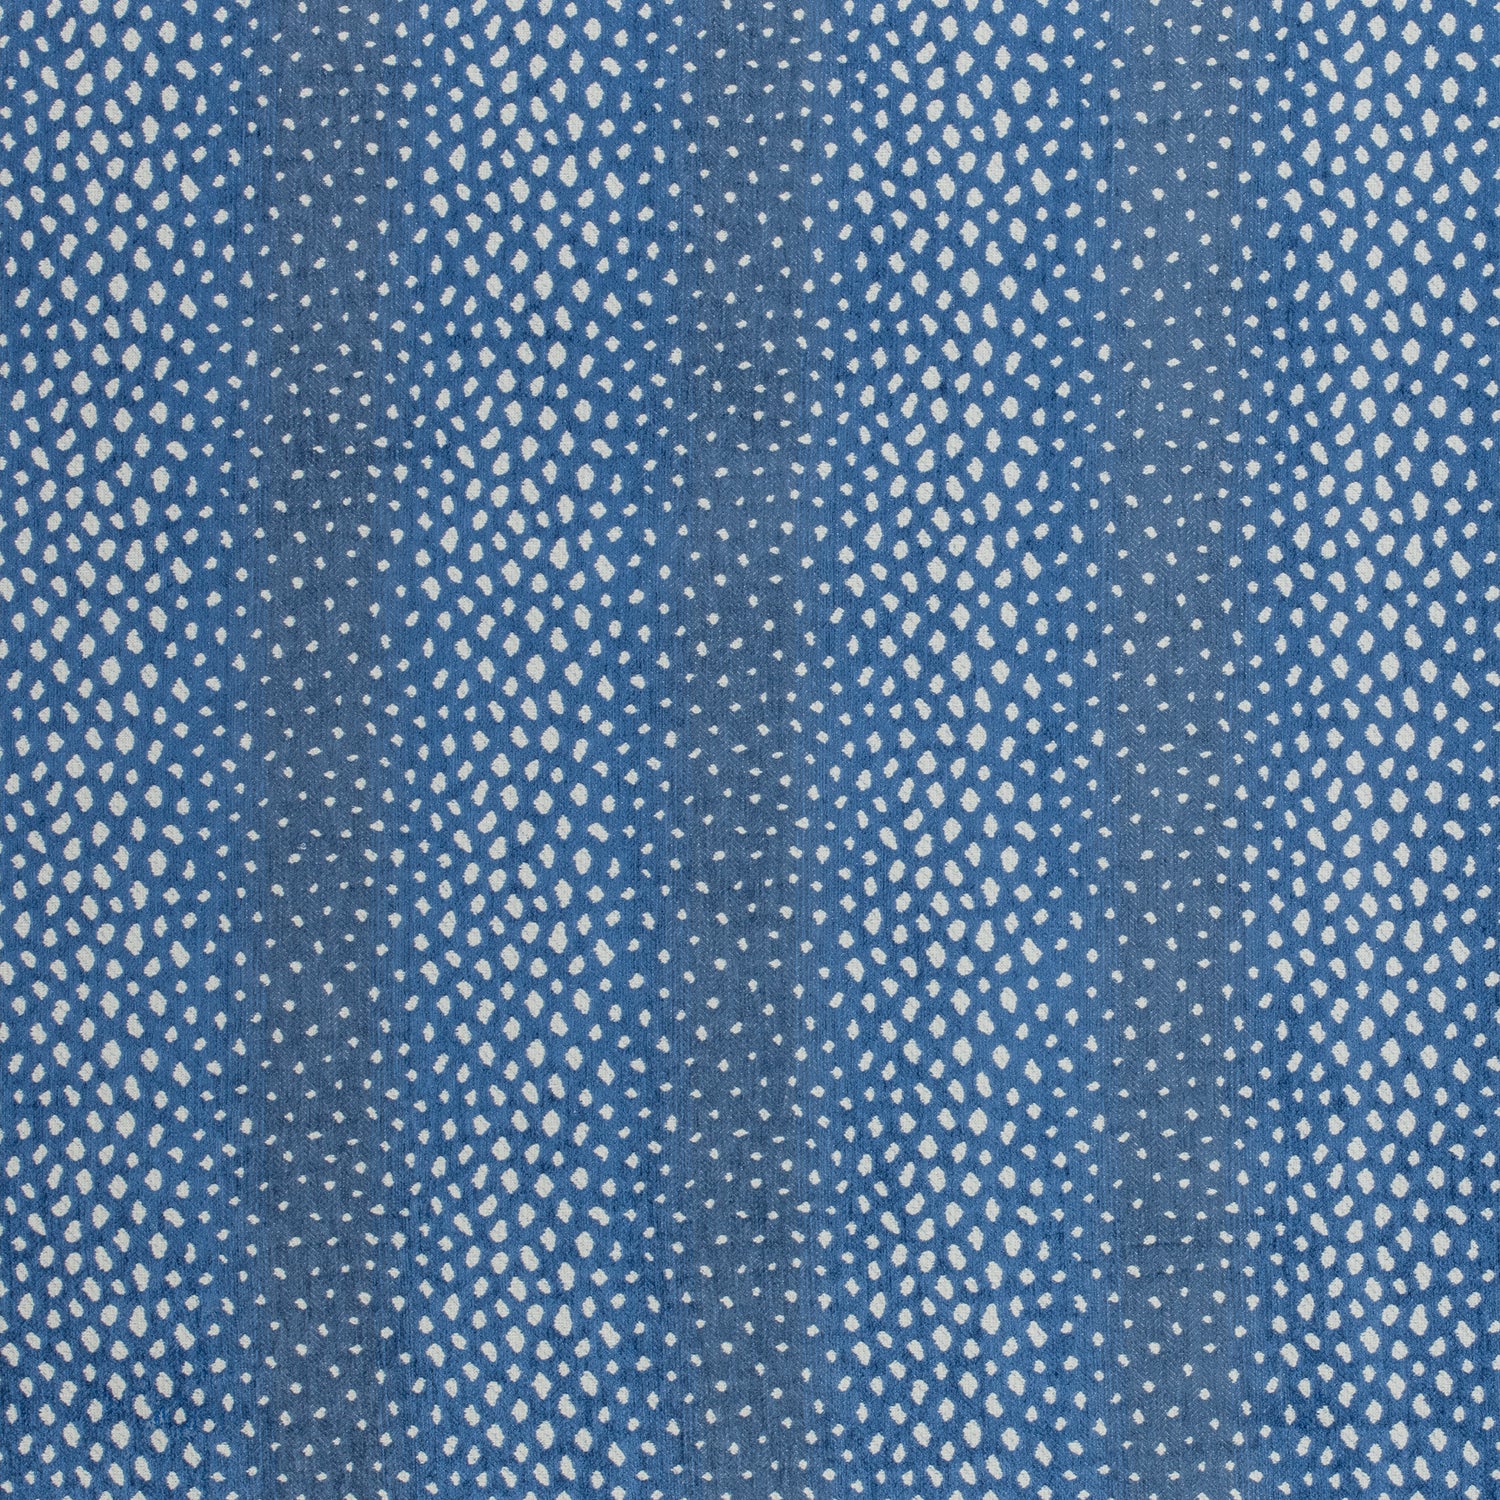 Gazelle fabric in blue color - pattern number W80432 - by Thibaut in the Woven Resource Vol 10 Menagerie collection